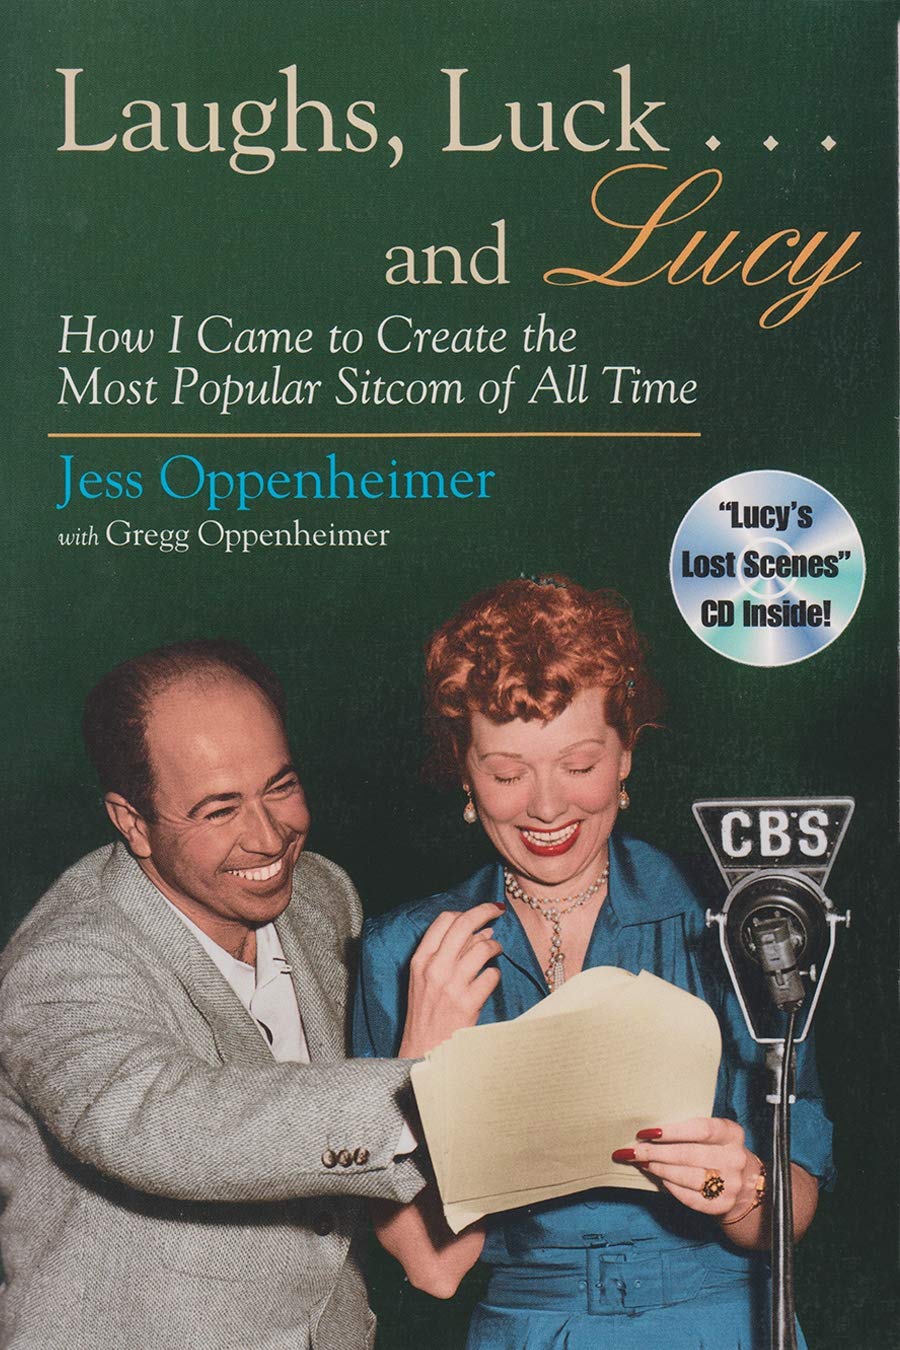 Laughs, Luck…and Lucy: How I Came To Create the Most Popular Sitcom of All Time, by Jess Oppenheimer and Gregg Oppenheimer (1999)